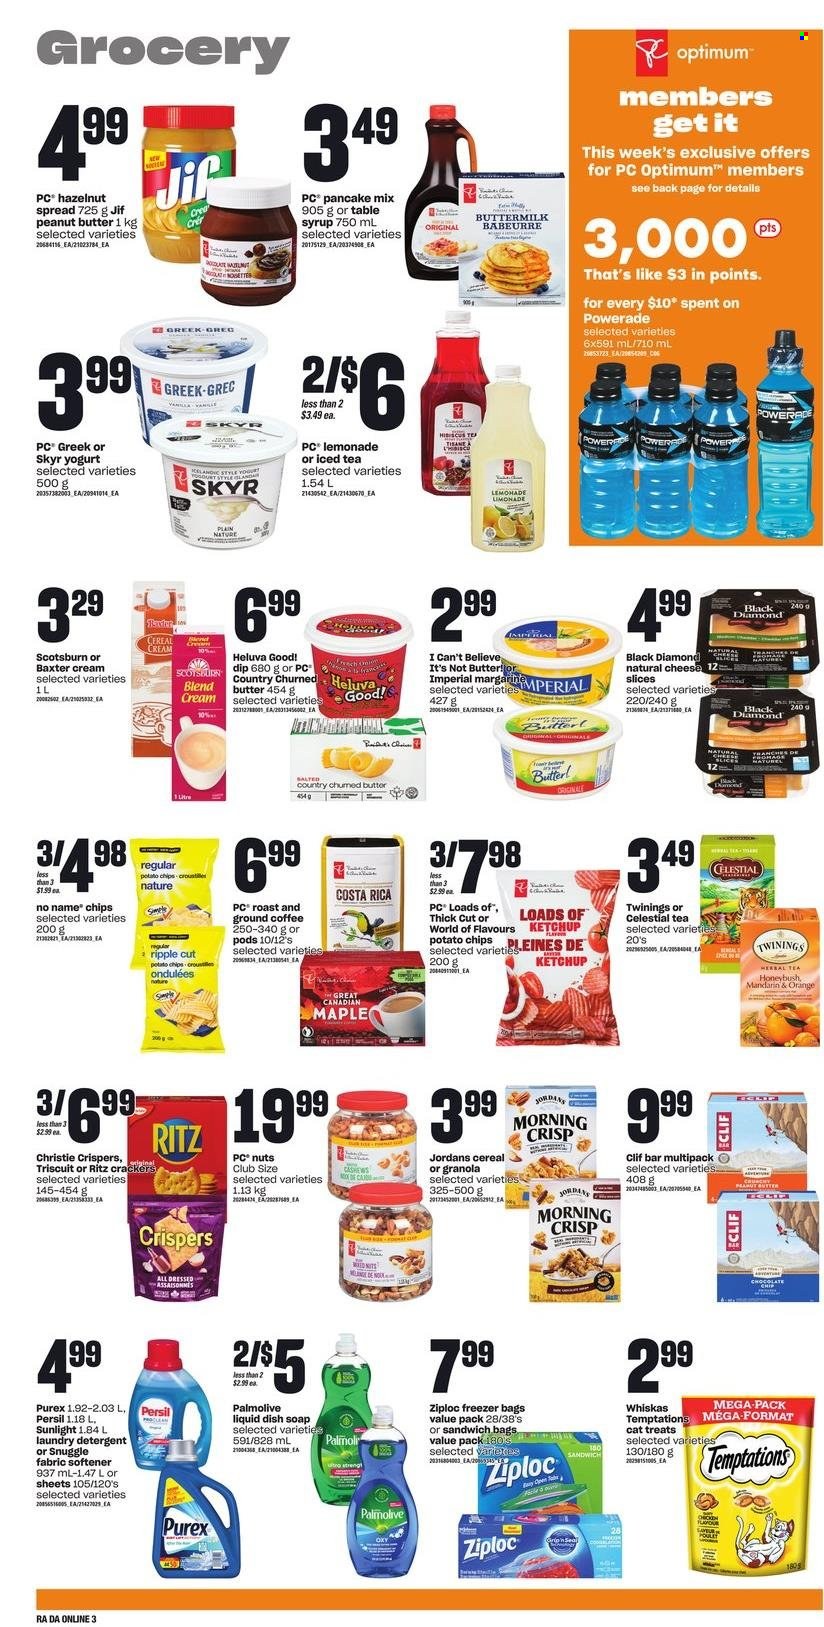 thumbnail - Dominion Flyer - May 19, 2022 - May 25, 2022 - Sales products - mandarines, No Name, pancakes, cheese, yoghurt, buttermilk, dip, crackers, RITZ, potato chips, chips, cereals, peanut butter, syrup, hazelnut spread, Jif, lemonade, Powerade, ice tea, Twinings, coffee, ground coffee, Snuggle, Persil, fabric softener, laundry detergent, Sunlight, Purex, Palmolive, soap, bag, Ziploc, freezer bag, N All, pen, Optimum, table, detergent, granola, ketchup, Whiskas. Page 7.